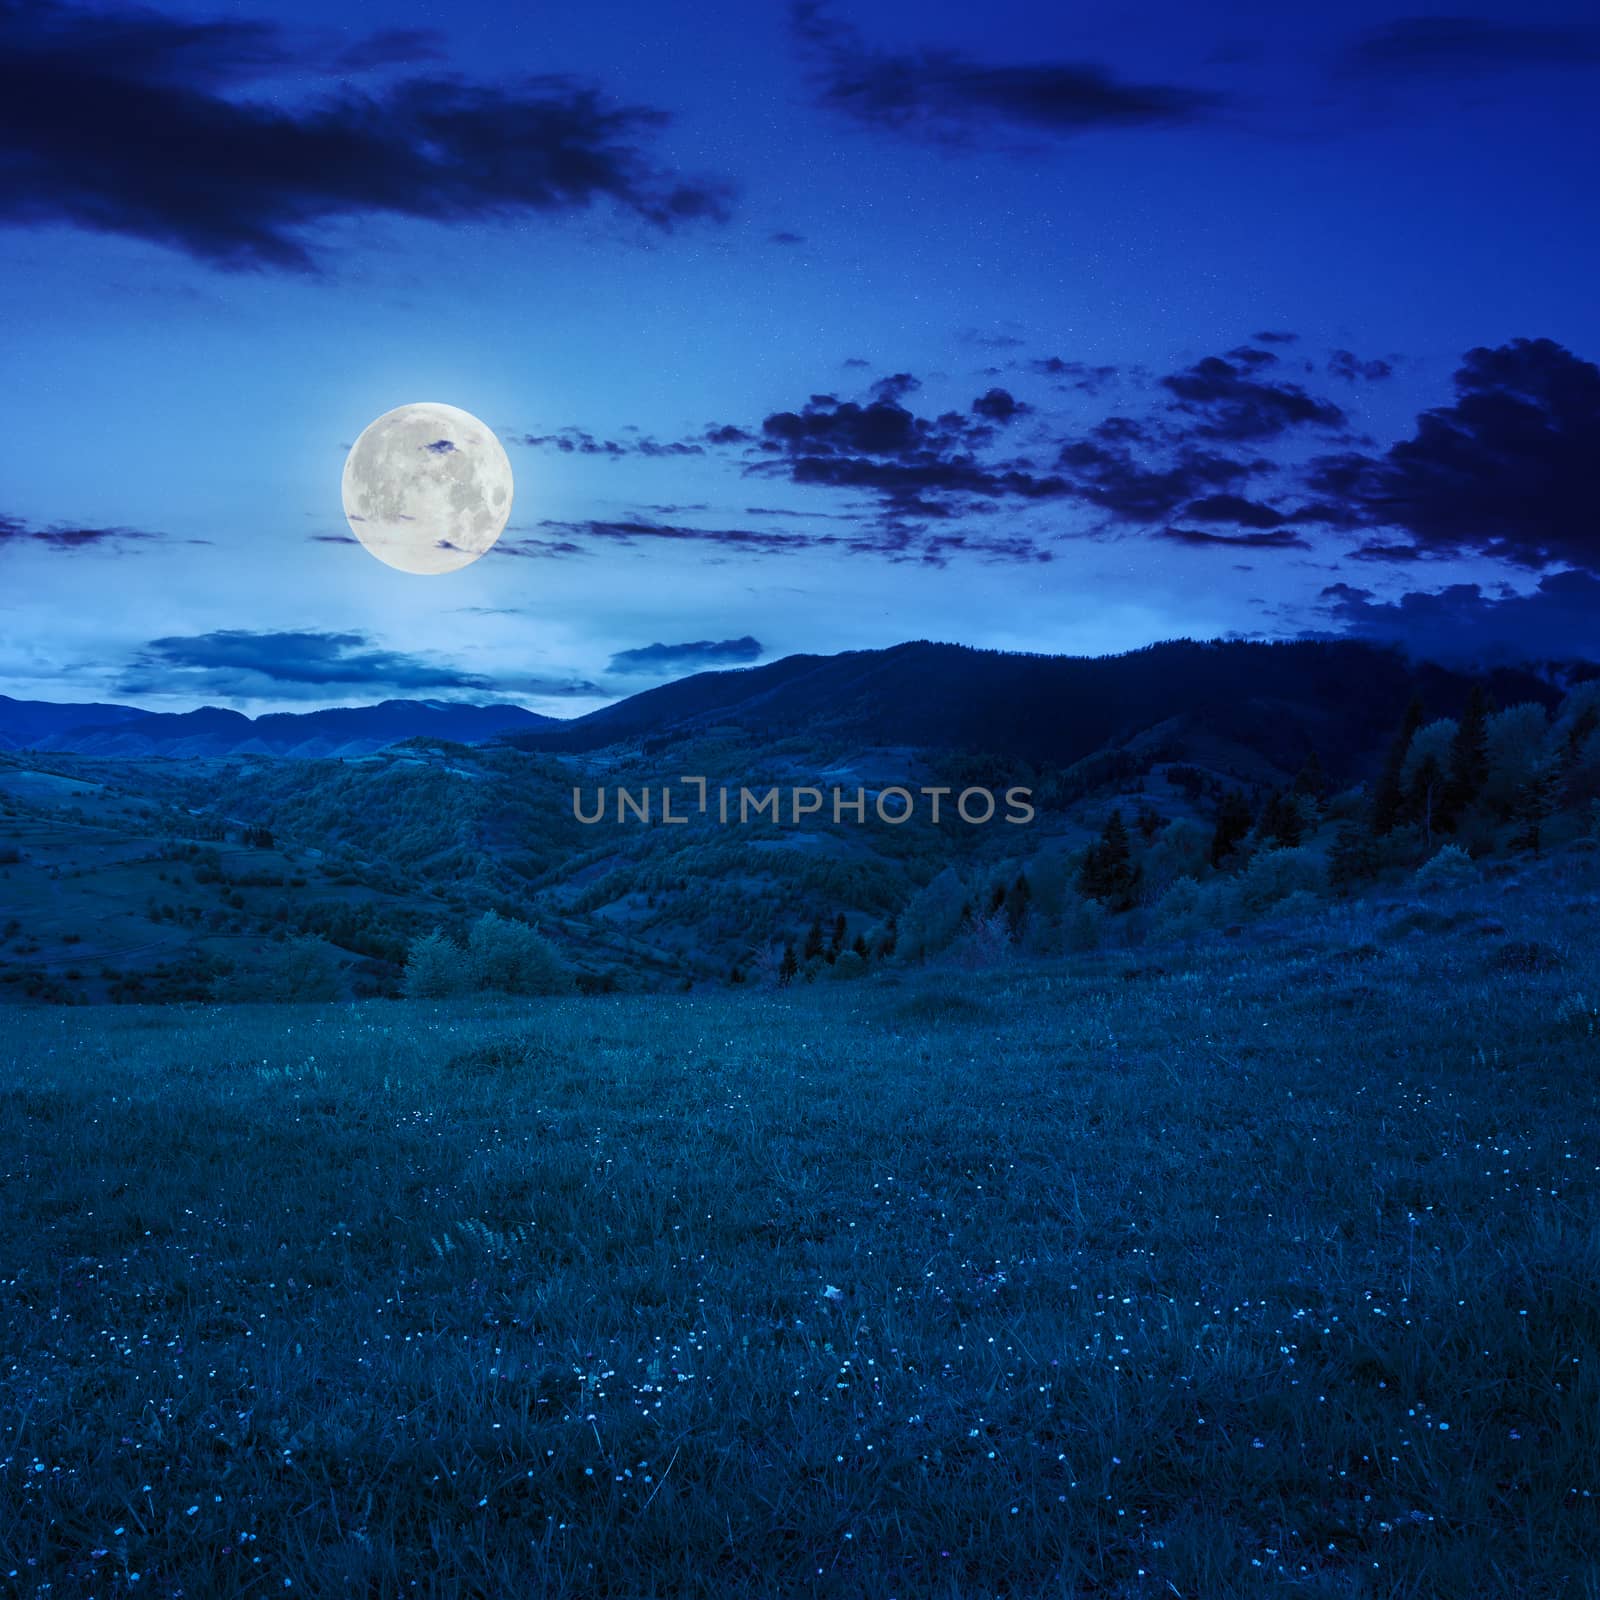 trees near meadow in mountains at night by Pellinni